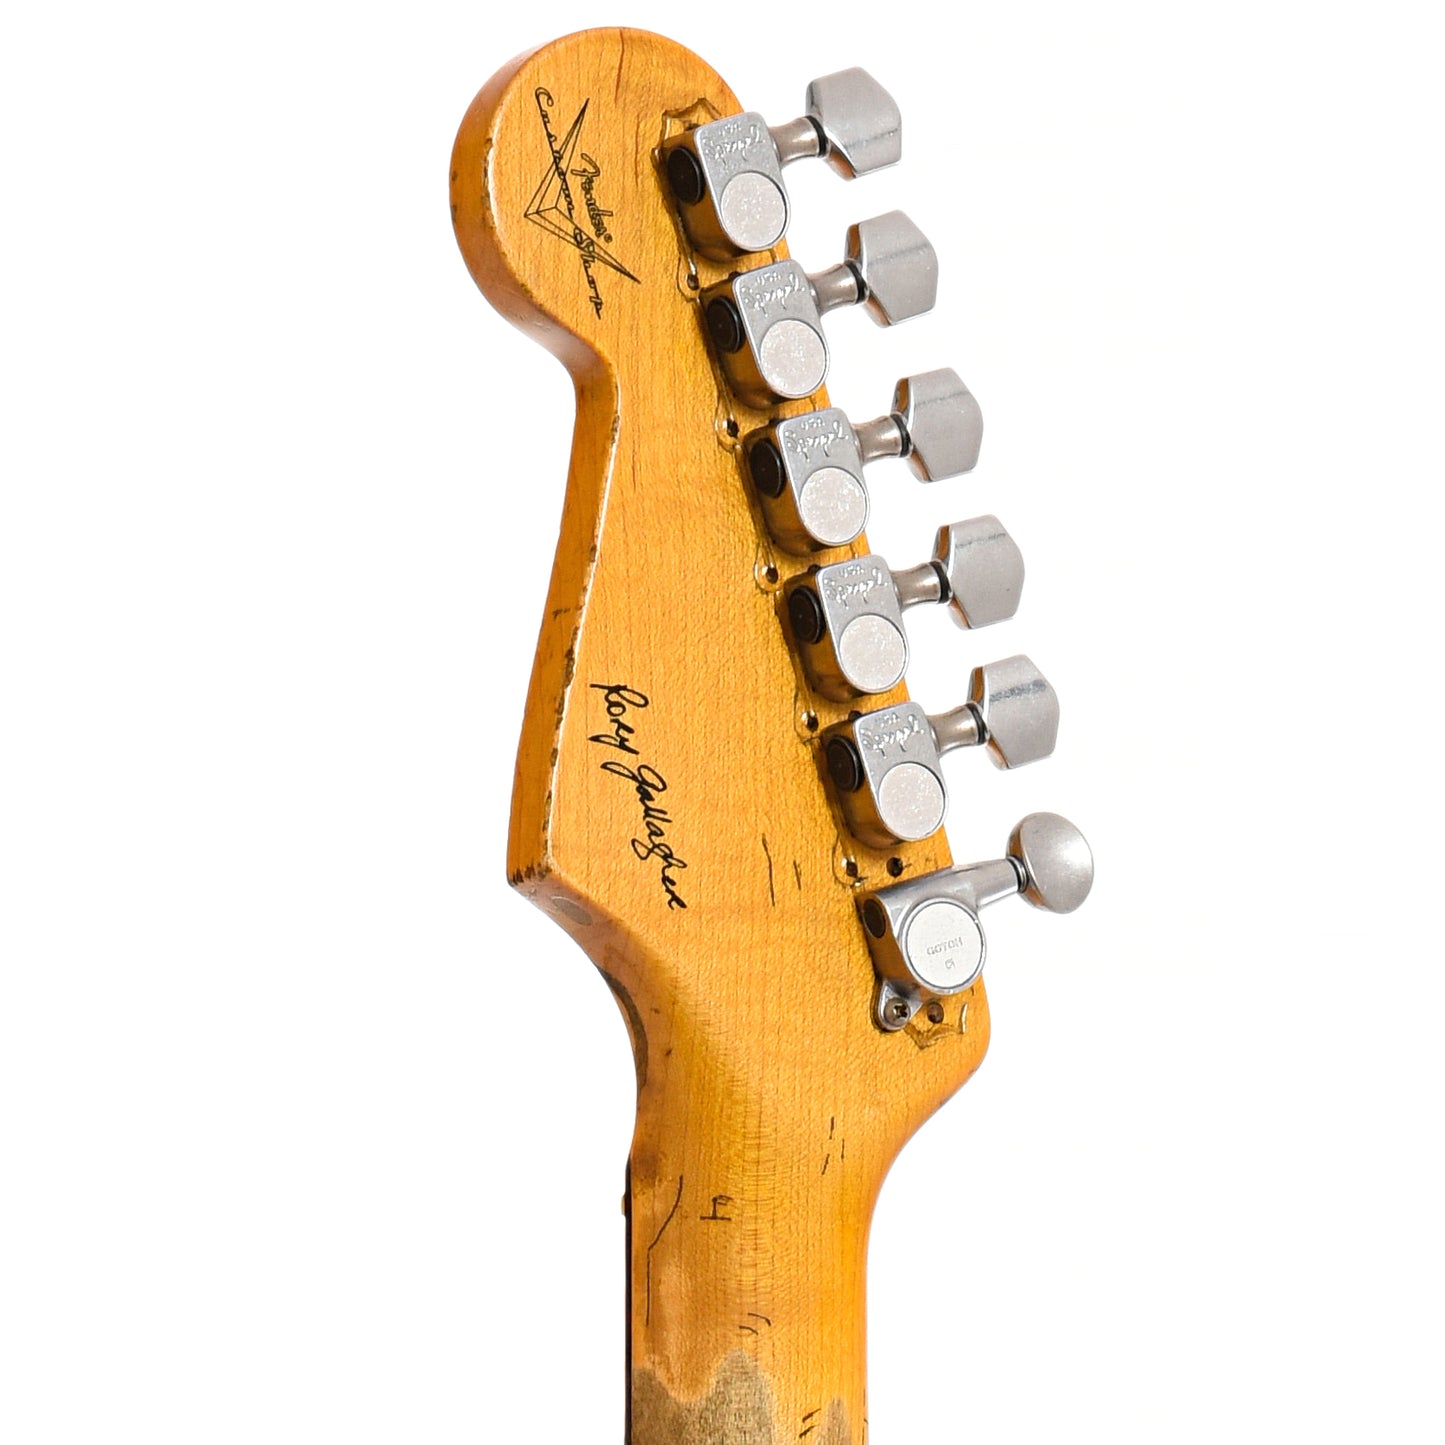 Back headstock of Fender Rory Gallagher